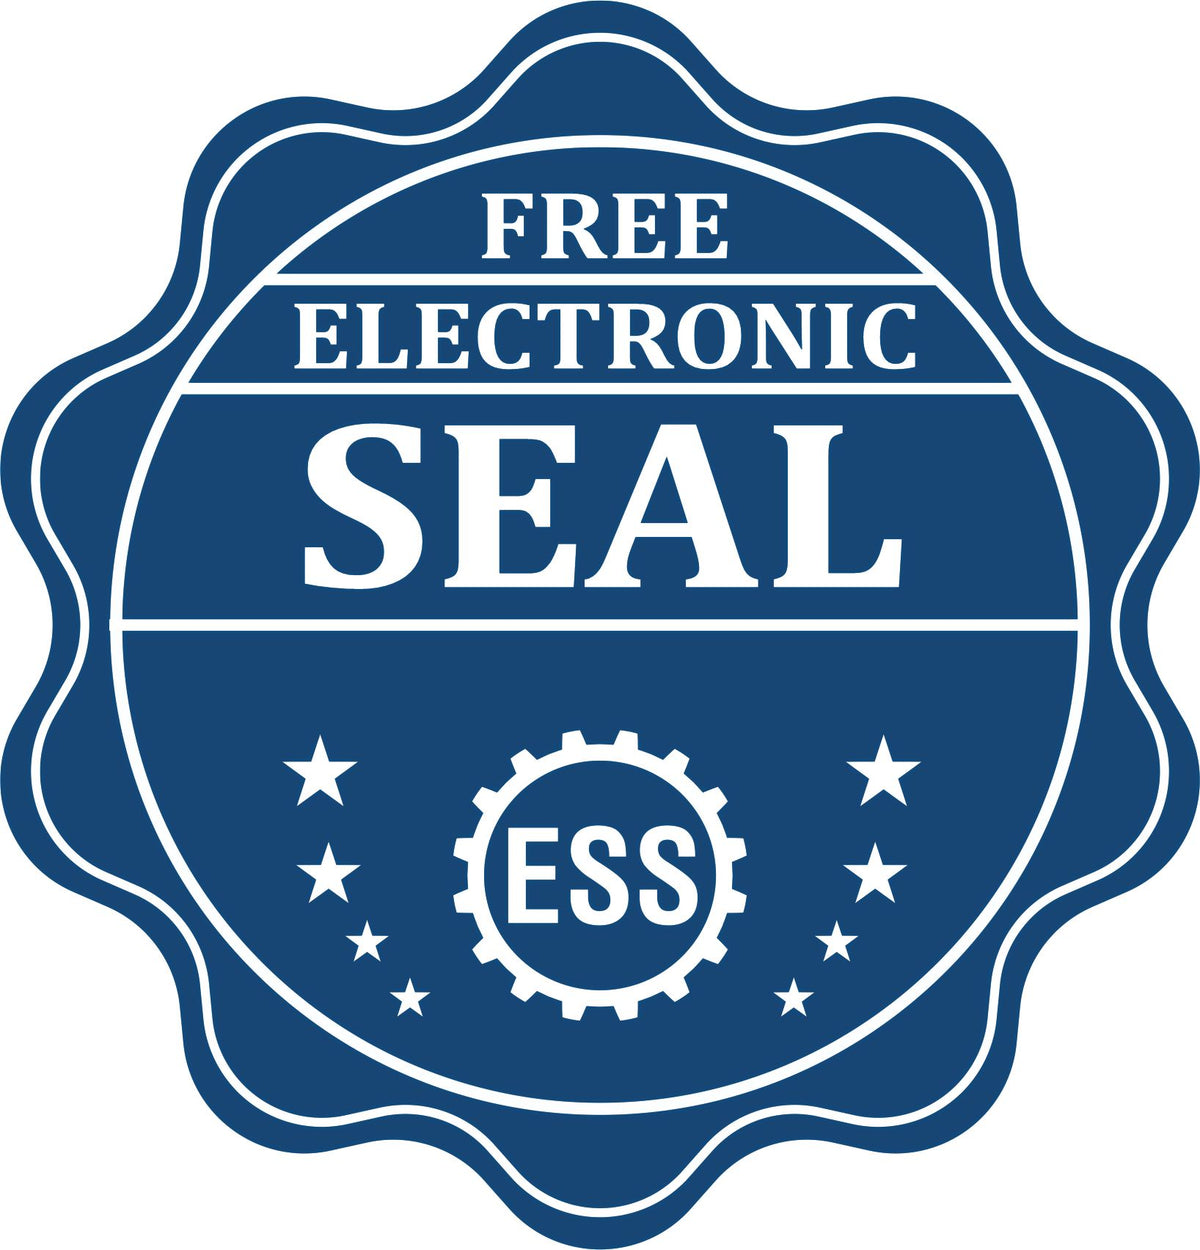 A badge showing a free electronic seal for the State of Nebraska Long Reach Architectural Embossing Seal with stars and the ESS gear on the emblem.